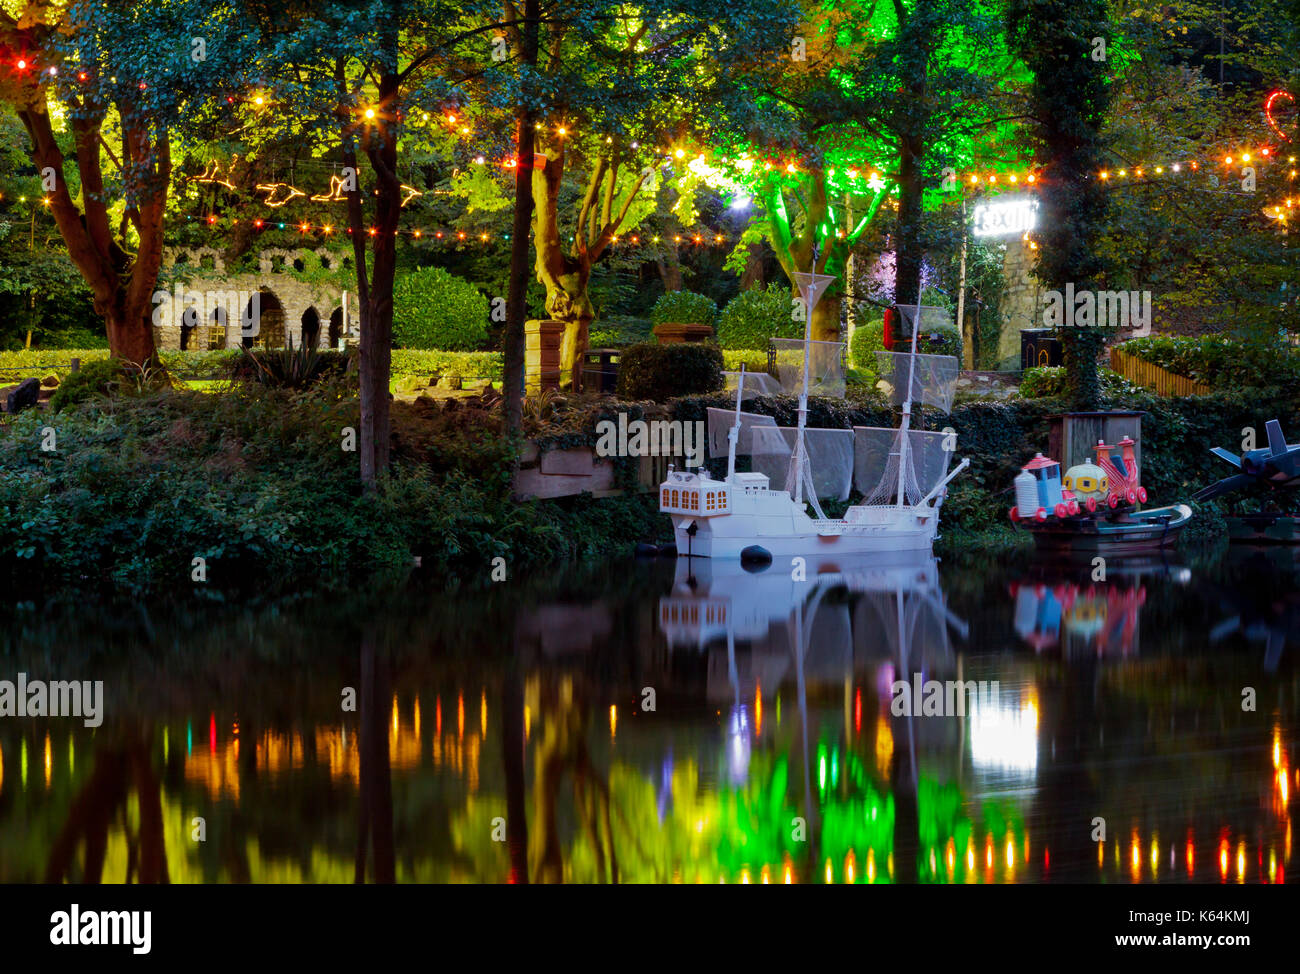 Matlock, UK. 11th Sep, 2017. Matlock Bath Illuminations season begins. Decorated boats on the River Derwent at the start of the annual illluminations season in Matlock Bath Derbyshire England UK which takes place every September and October. Credit: Robert Morris/Alamy Live News Stock Photo